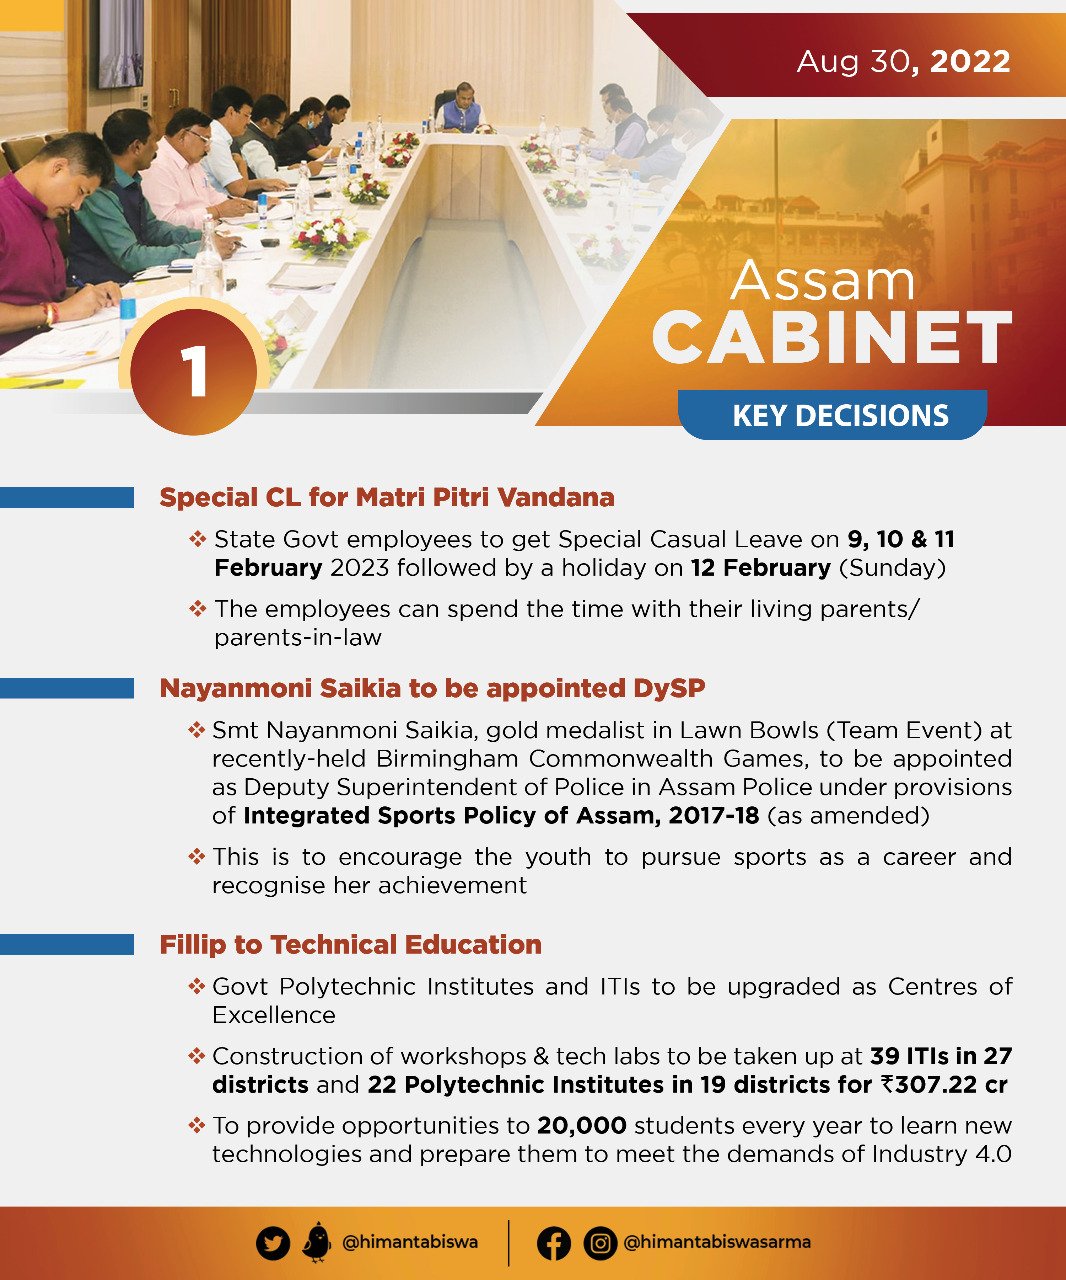 Cabinet Decisions taken on 19 August, 2022 (1)